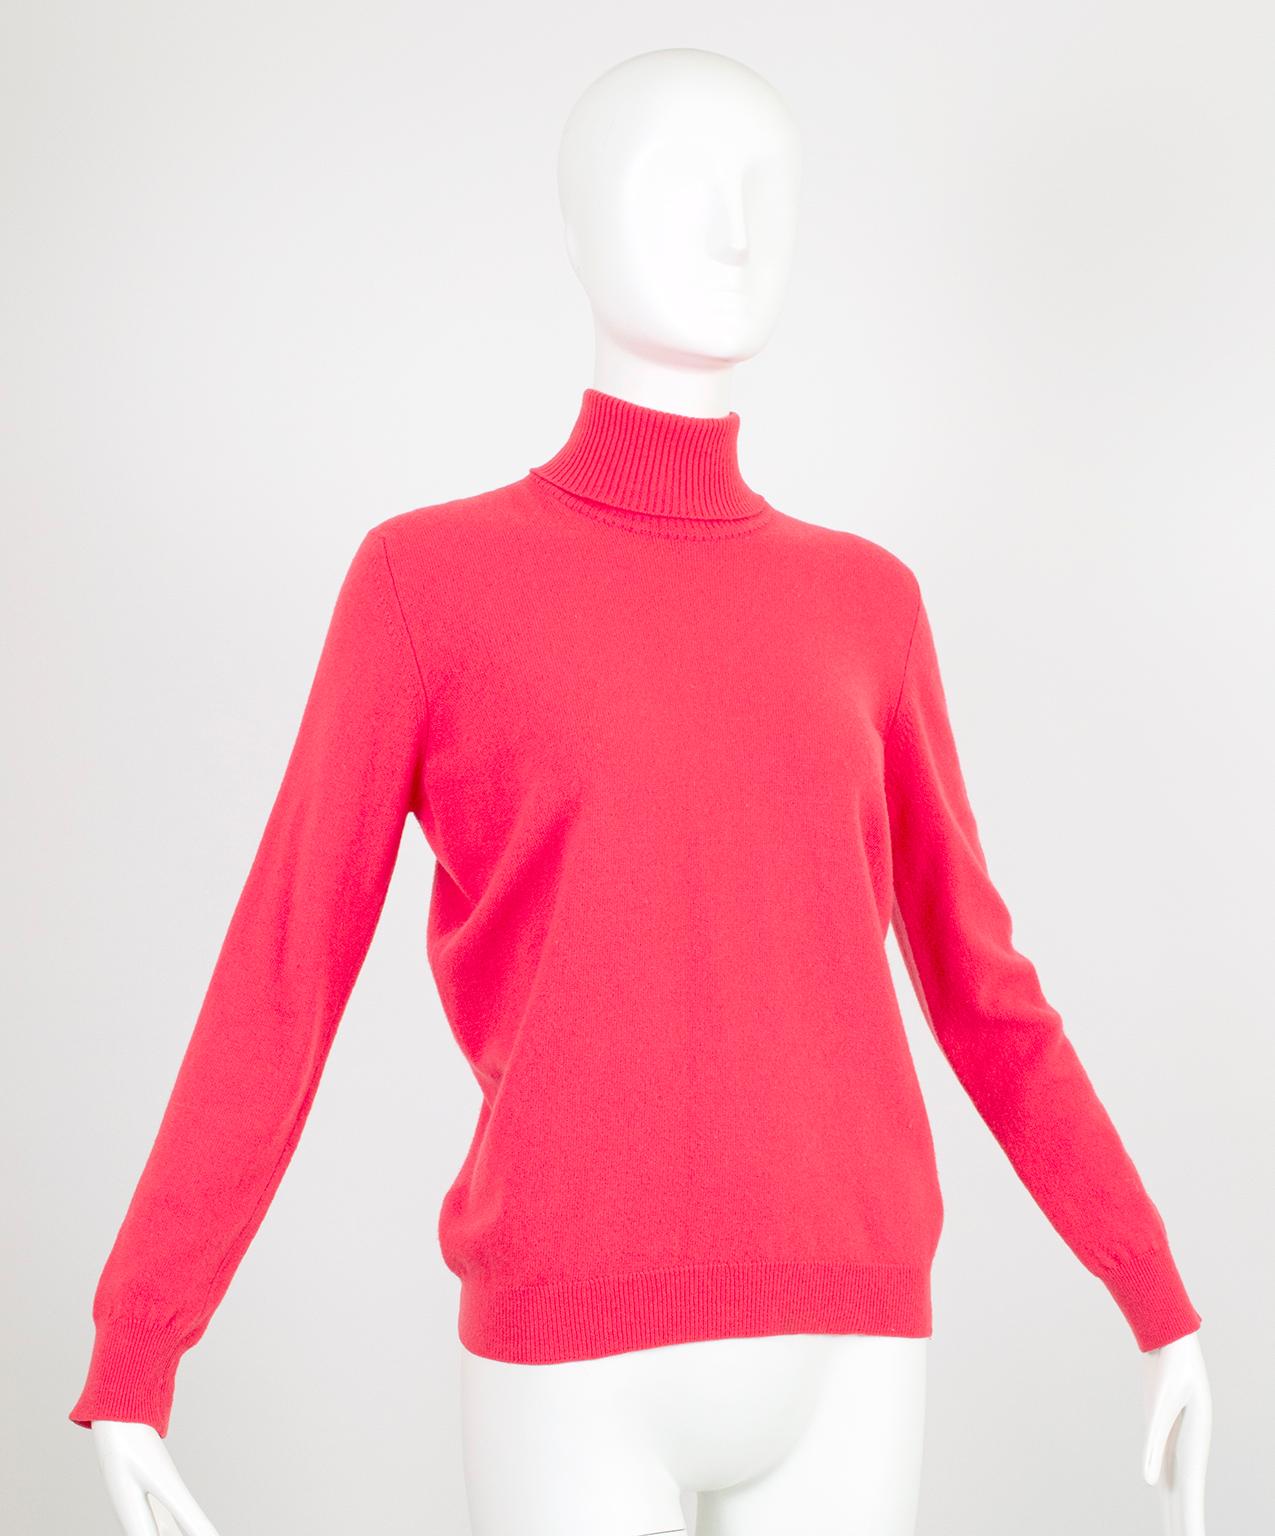 What might otherwise be a pedestrian turtleneck is transformed by a vibrant (and hard-to-find) hue favored in the 20s and 30s. Surprisingly versatile despite its infrequent fashion presence, it can be paired with gray, camel, navy and of course